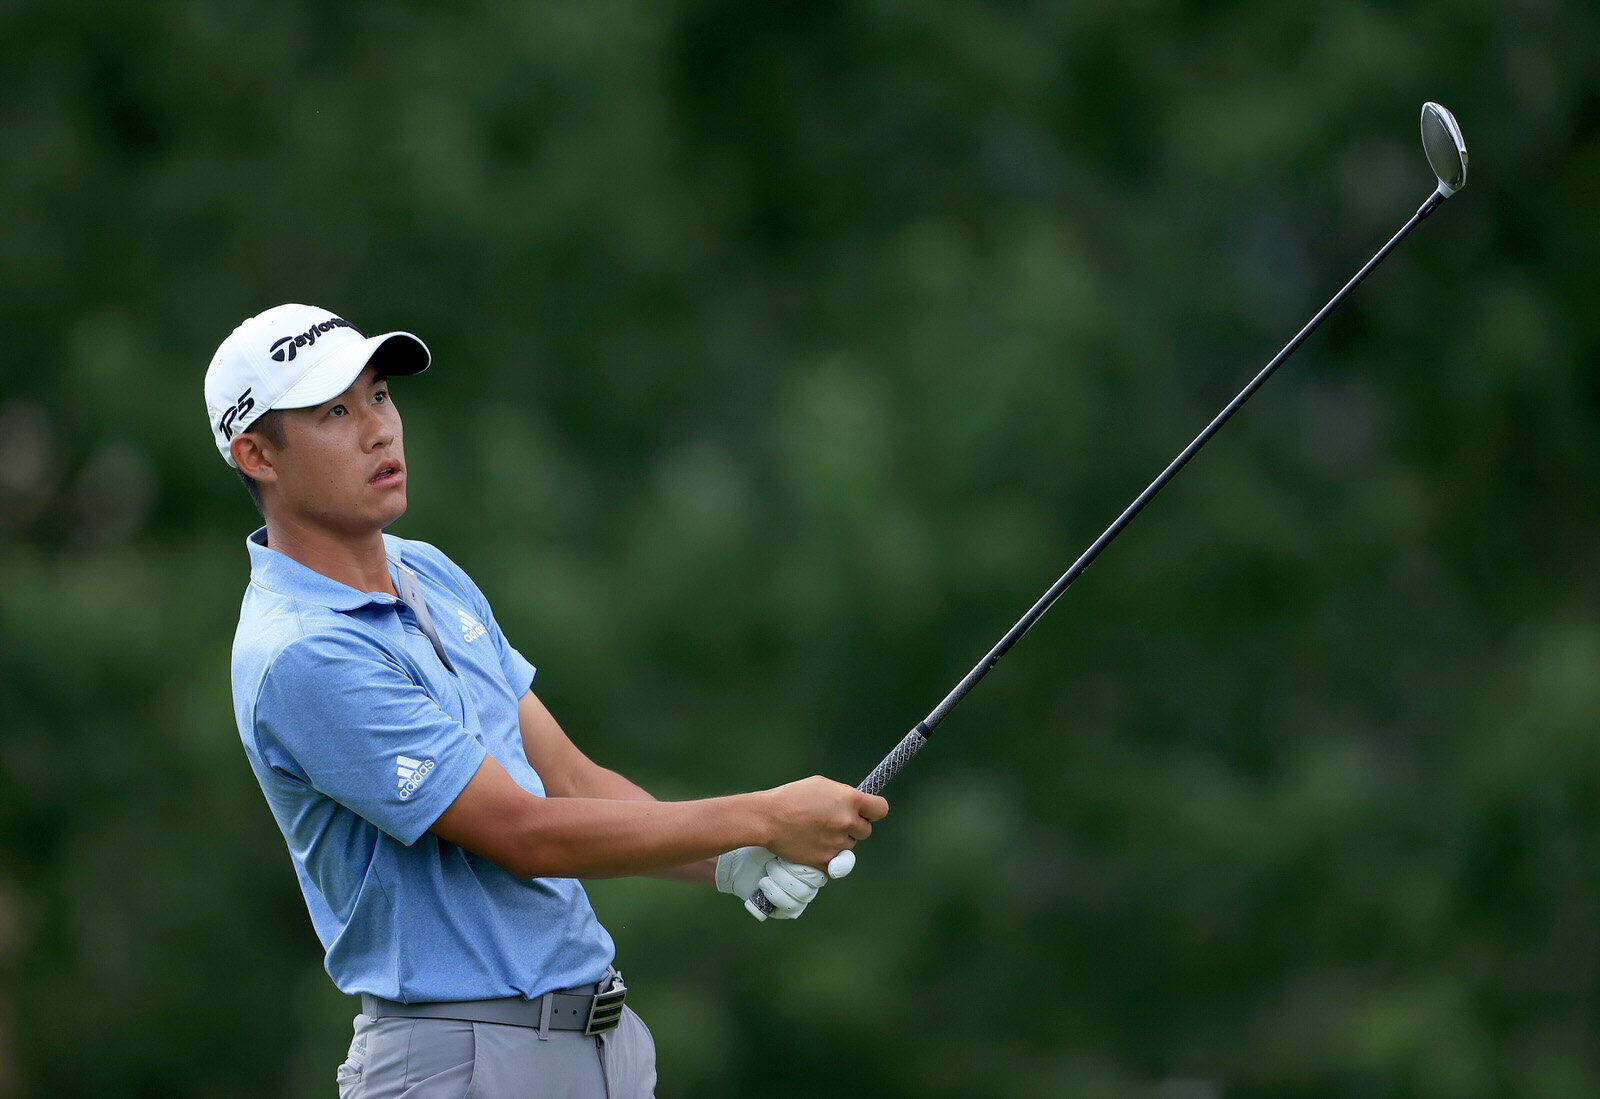  DUBLIN, OHIO - JULY 11: Collin Morikawa of the United States plays his shot from the 18th tee during the third round of the Workday Charity Open on July 11, 2020 at Muirfield Village Golf Club in Dublin, Ohio. (Photo by Sam Greenwood/Getty Images) 